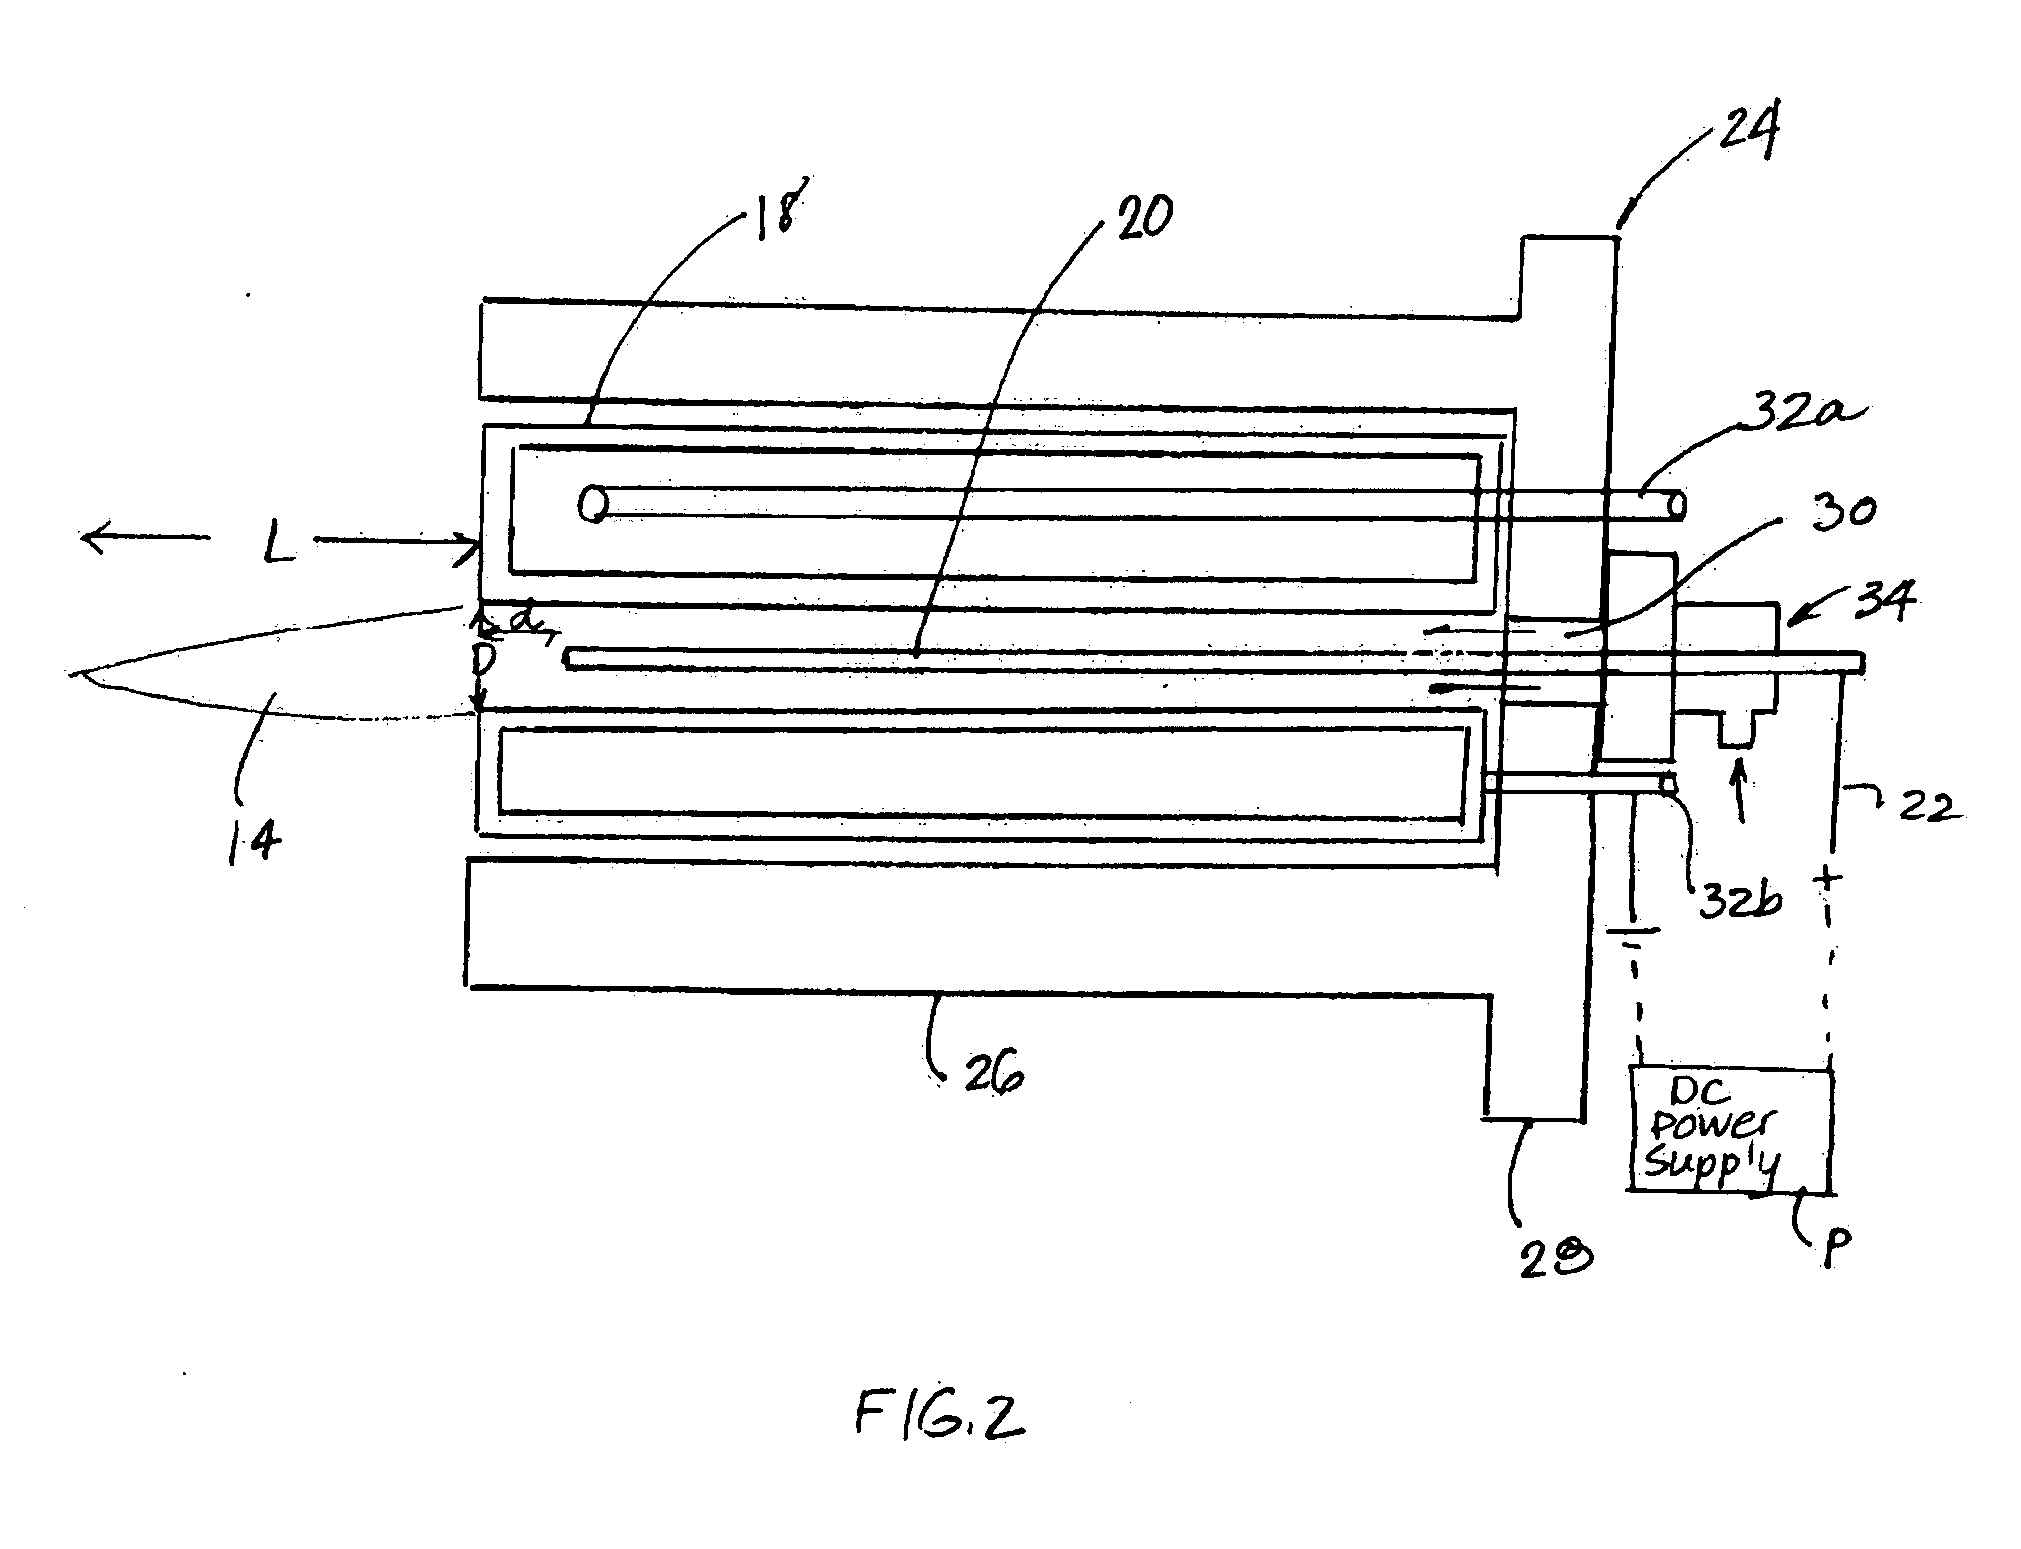 Arc plasma jet and method of use for chemical scrubbing system